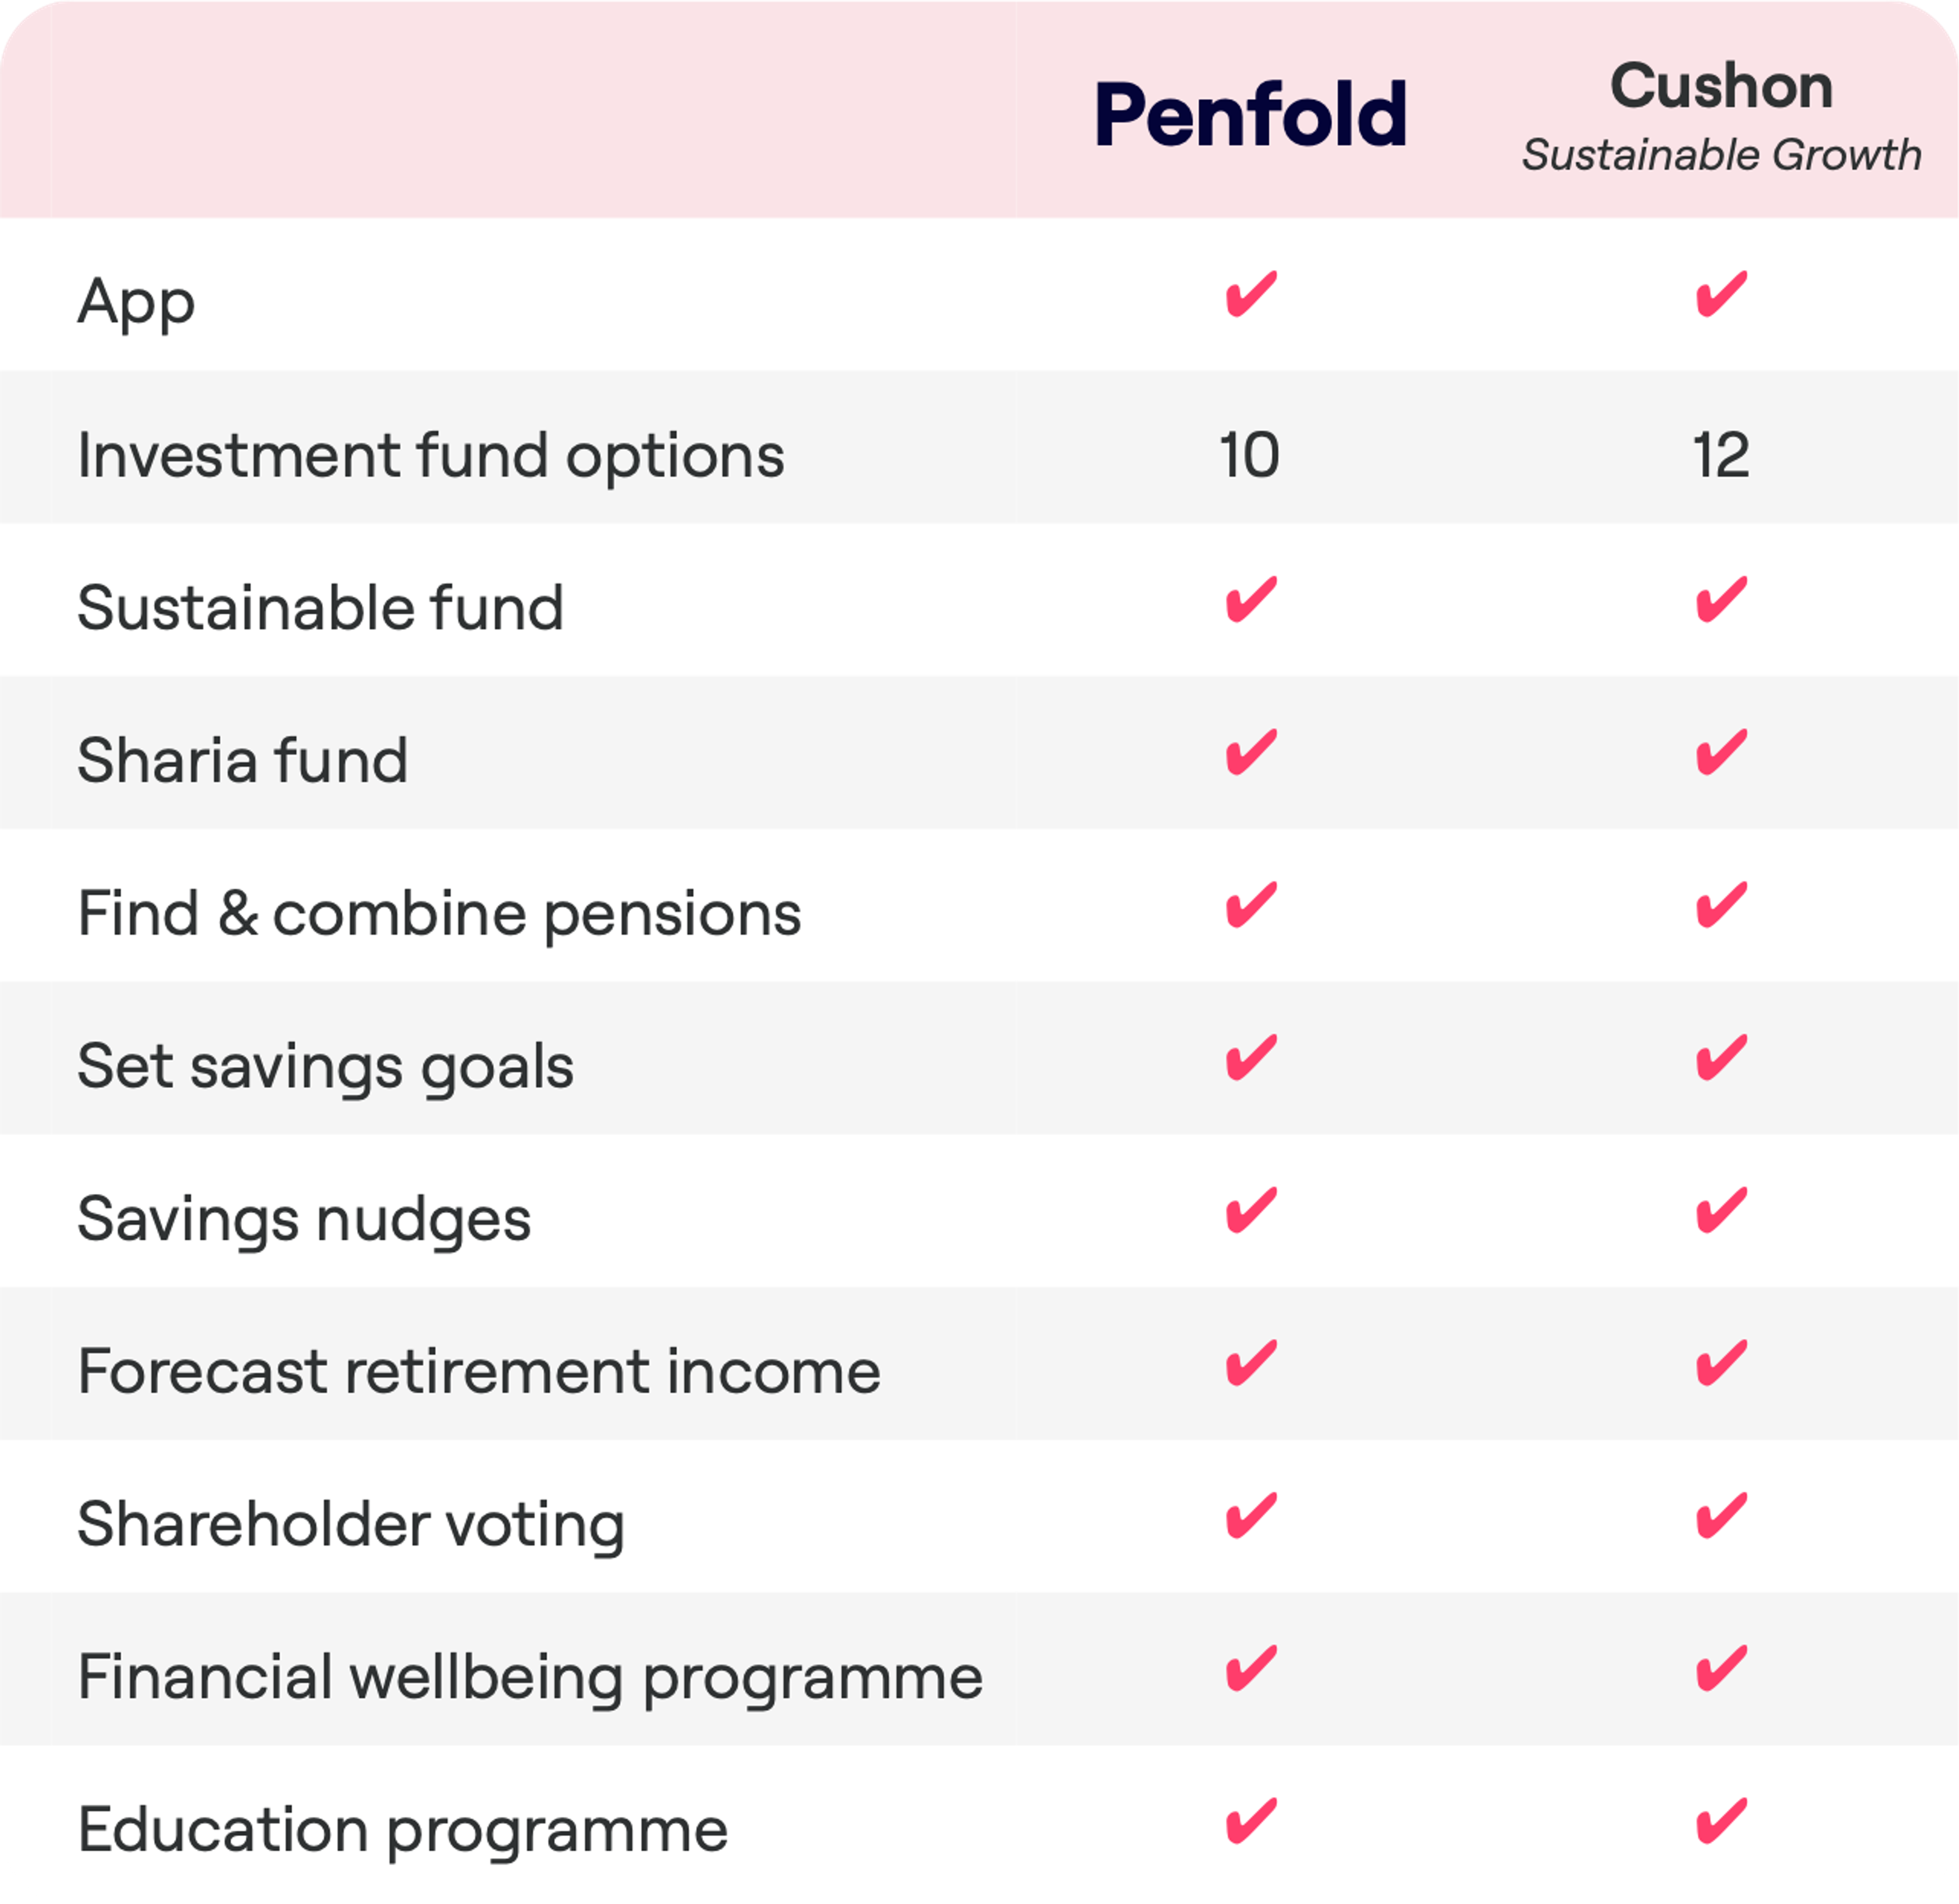 A feature comparison chart for Penfold and Cushon under Sustainable Growth. Both offer an app, sustainable and Sharia funds, set savings goals, savings nudges, forecast retirement income, shareholder voting, a financial wellbeing programme, and an education programme. Penfold offers 10 investment fund options and the ability to find and combine pensions, whereas Cushon provides 12 investment fund options but does not offer the option to find and combine pensions.